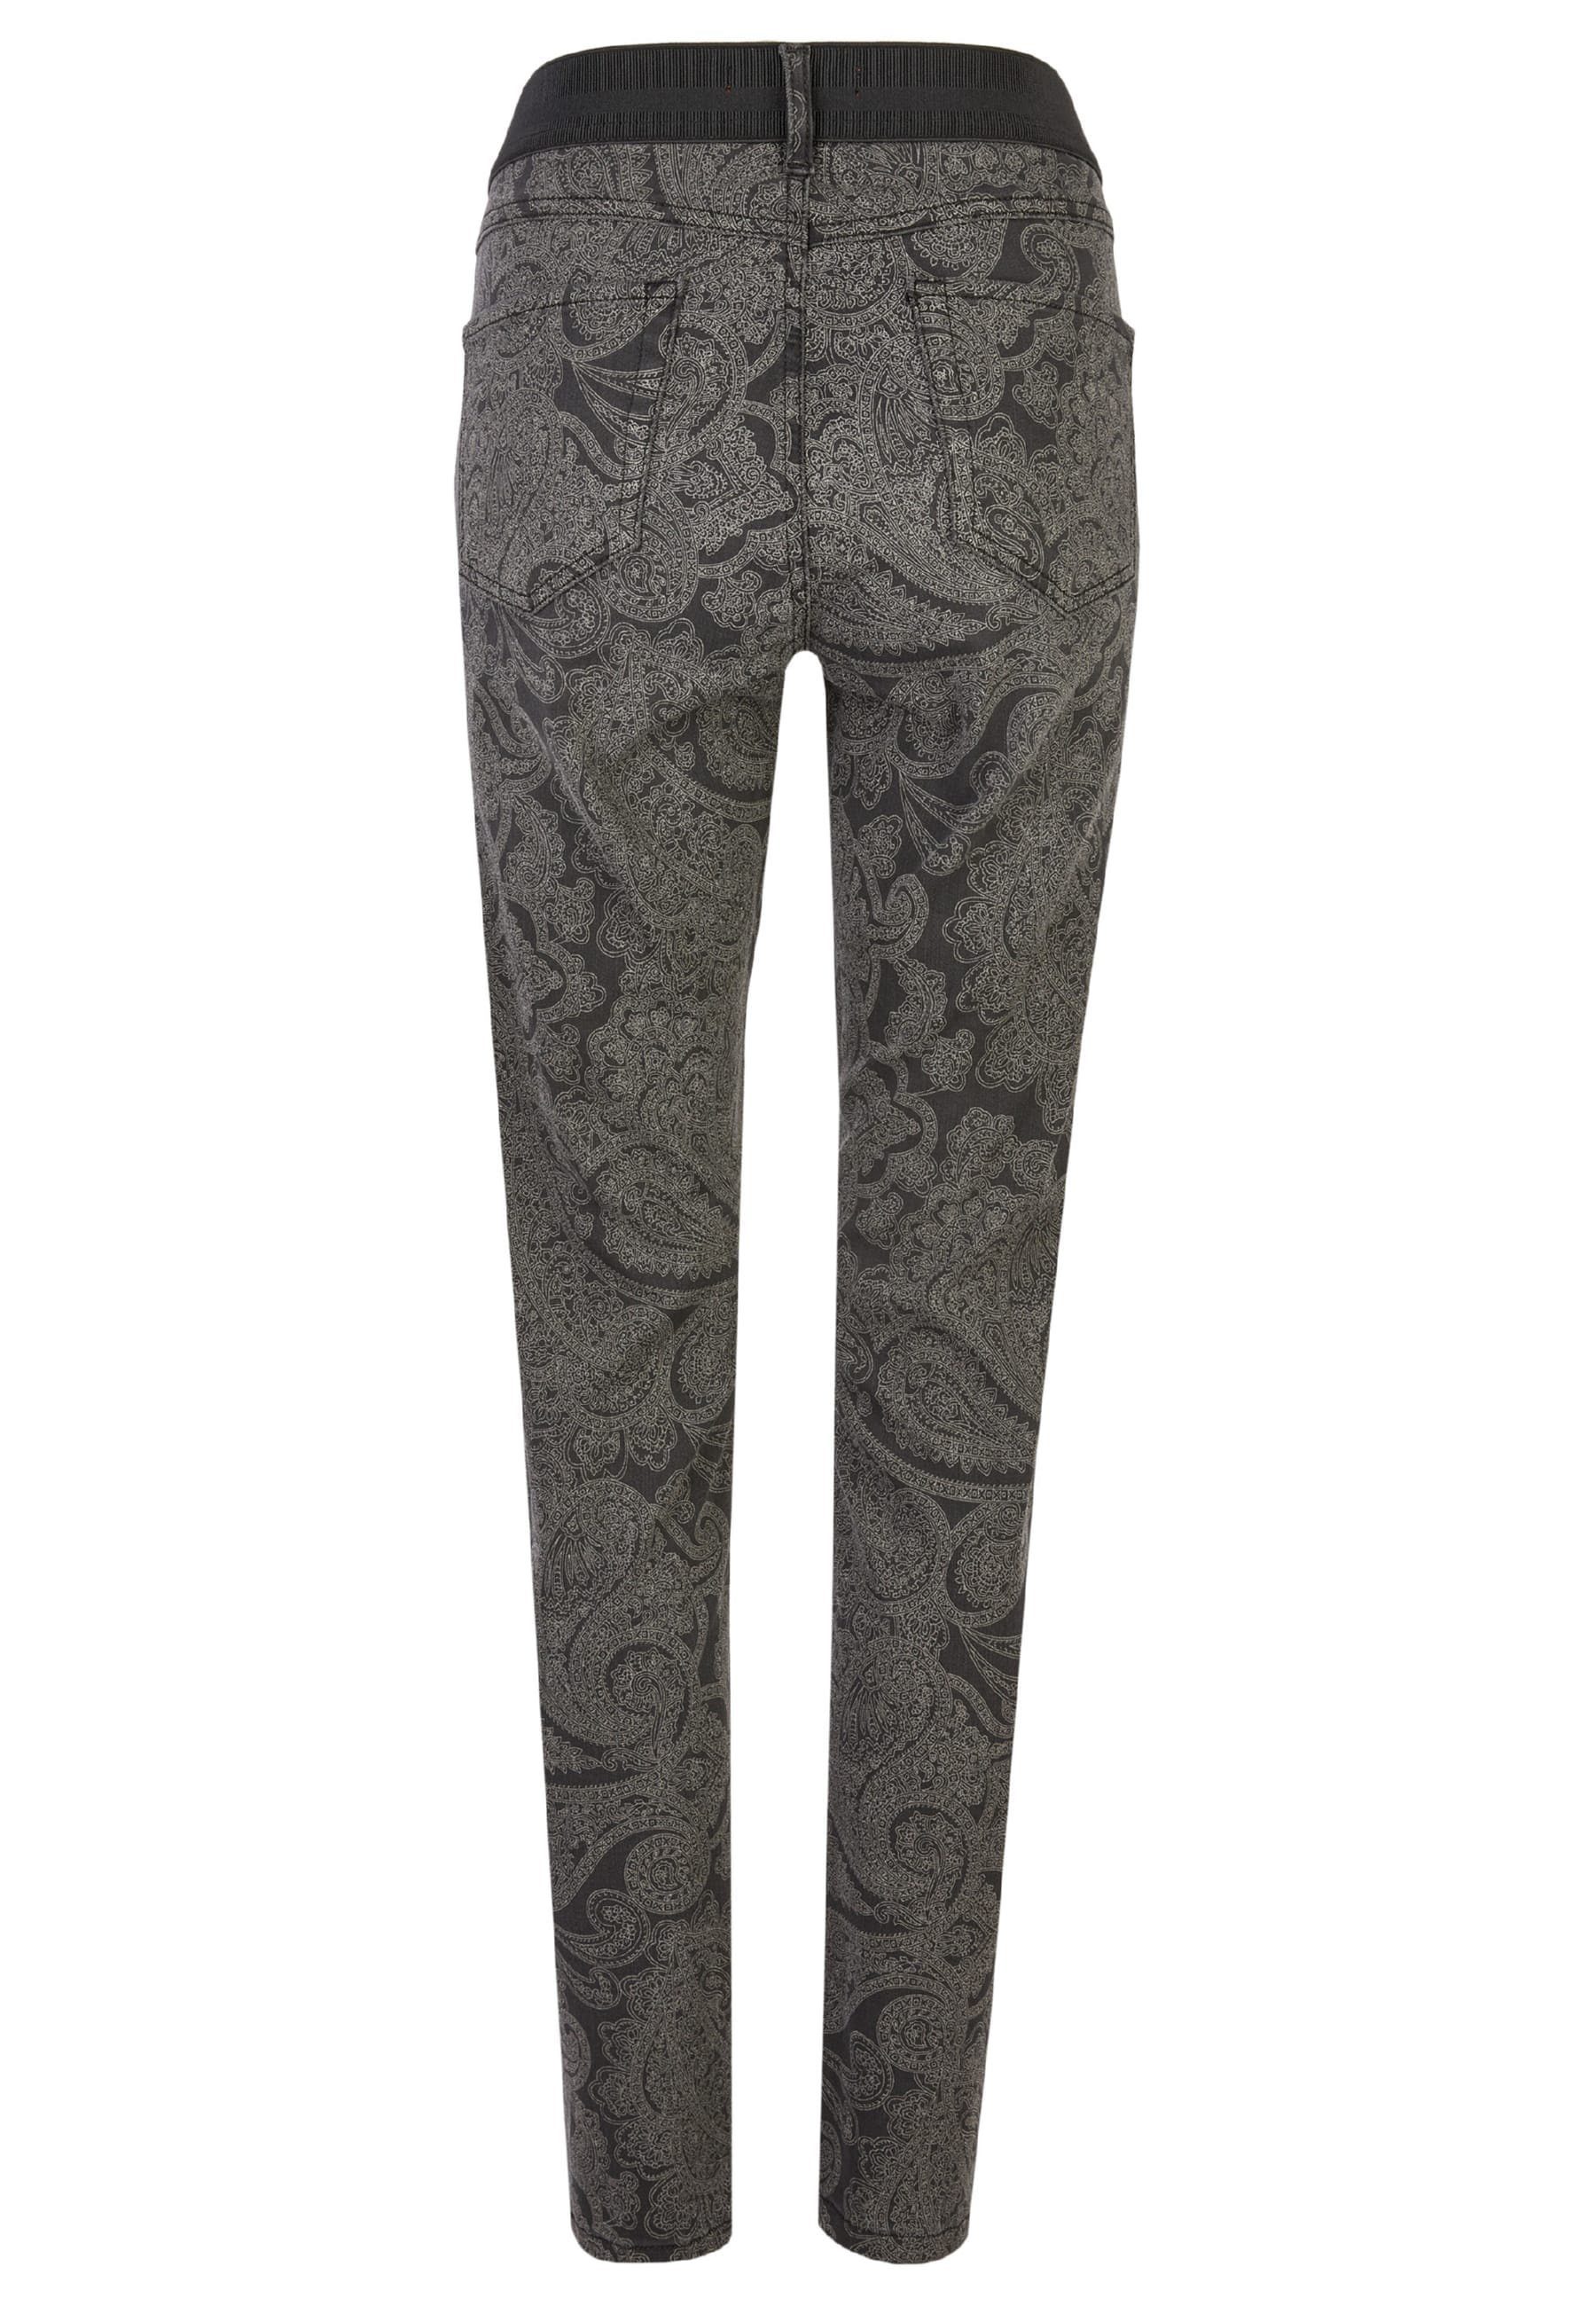 ANGELS Slim-fit-Jeans Jeans One Size Label-Applikationen mit Paisley-Muster mit anthrazit